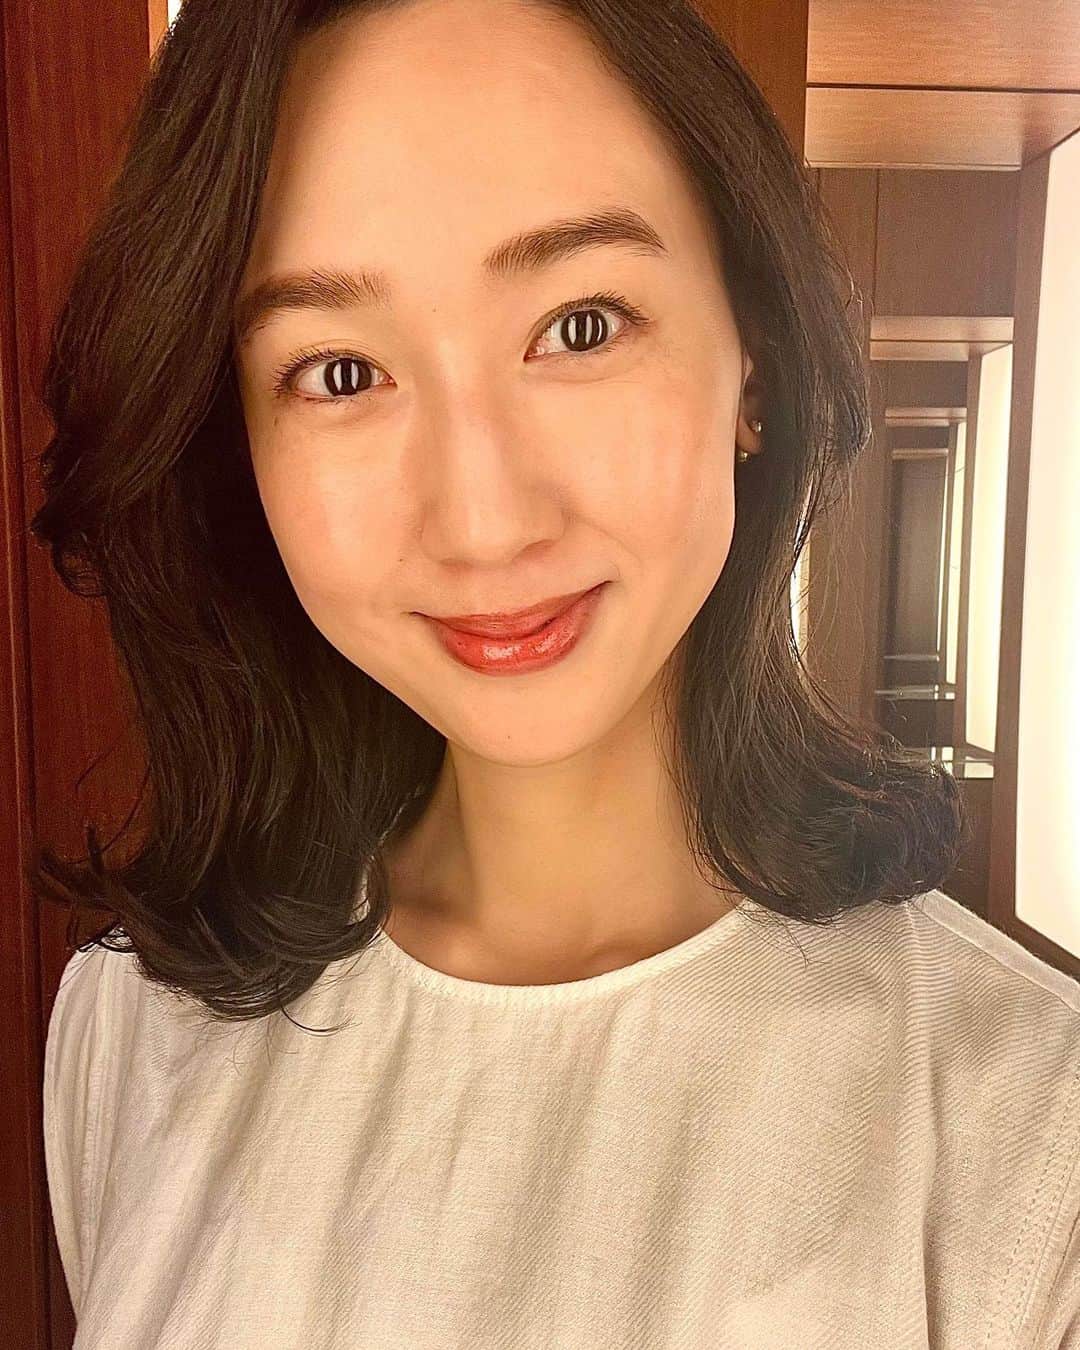 松原汐織さんのインスタグラム写真 - (松原汐織Instagram)「I've been interested in beauty more and more since I came back to Japan. My beautiful friends taught me a lot of beauty tips. I enjoy trying new skincare items. I especially recommend @drunkelephant . It’s easy to use all serums and cream mix like a smoothie.  Also, I have got new undamaged hair @yuumakiiii . Length and colour are a little bit different from before.  Anyway, I want to know about the beauty tips you recommend❤️ ・ ・ 日本に帰ってきてから美容熱上昇🔥(というより、悪阻＆産後のバタバタ期間中は何もできずサボったツケが回ってきて、どうにかせねば！という感じです🥲)  美容通の友達が勧めてくれたものを試すのが楽しくて🤭 好みだったのが @drunkelephant 🐘 ピーリング効果があるセラムなどをクリームと一緒に全部一緒に混ぜて使えるという手軽さが最高！肌がちゅるんと整う感じがします🫶🏻  硬水で傷んで色落ちした髪はGarland表参道 @yuumakiiii さんにカット＆毛先を中心にカラーしていただいて、蘇りました❤️  ヨーロッパに戻ったら、またバタバタの生活が待っているので、スッピン力を向上したいです🫡 色々試したいので、オススメ教えてください〜💕  ——— Outfit Details: Dress @massimodutti  Bag @newbottega  Sandals @hermes  ———  #baby #babygirl #5monthsold #mumofagirl #lovemyfam  #beautytips #drunkelephant  #出産 #海外出産 #女の子ママ  #海外子育て #イギリス子育て #ロンドン子育て  #一時帰国 #スキンケア #ドランクエレファント #美容院 #garland表参道」7月22日 16時47分 - shiori_ma_